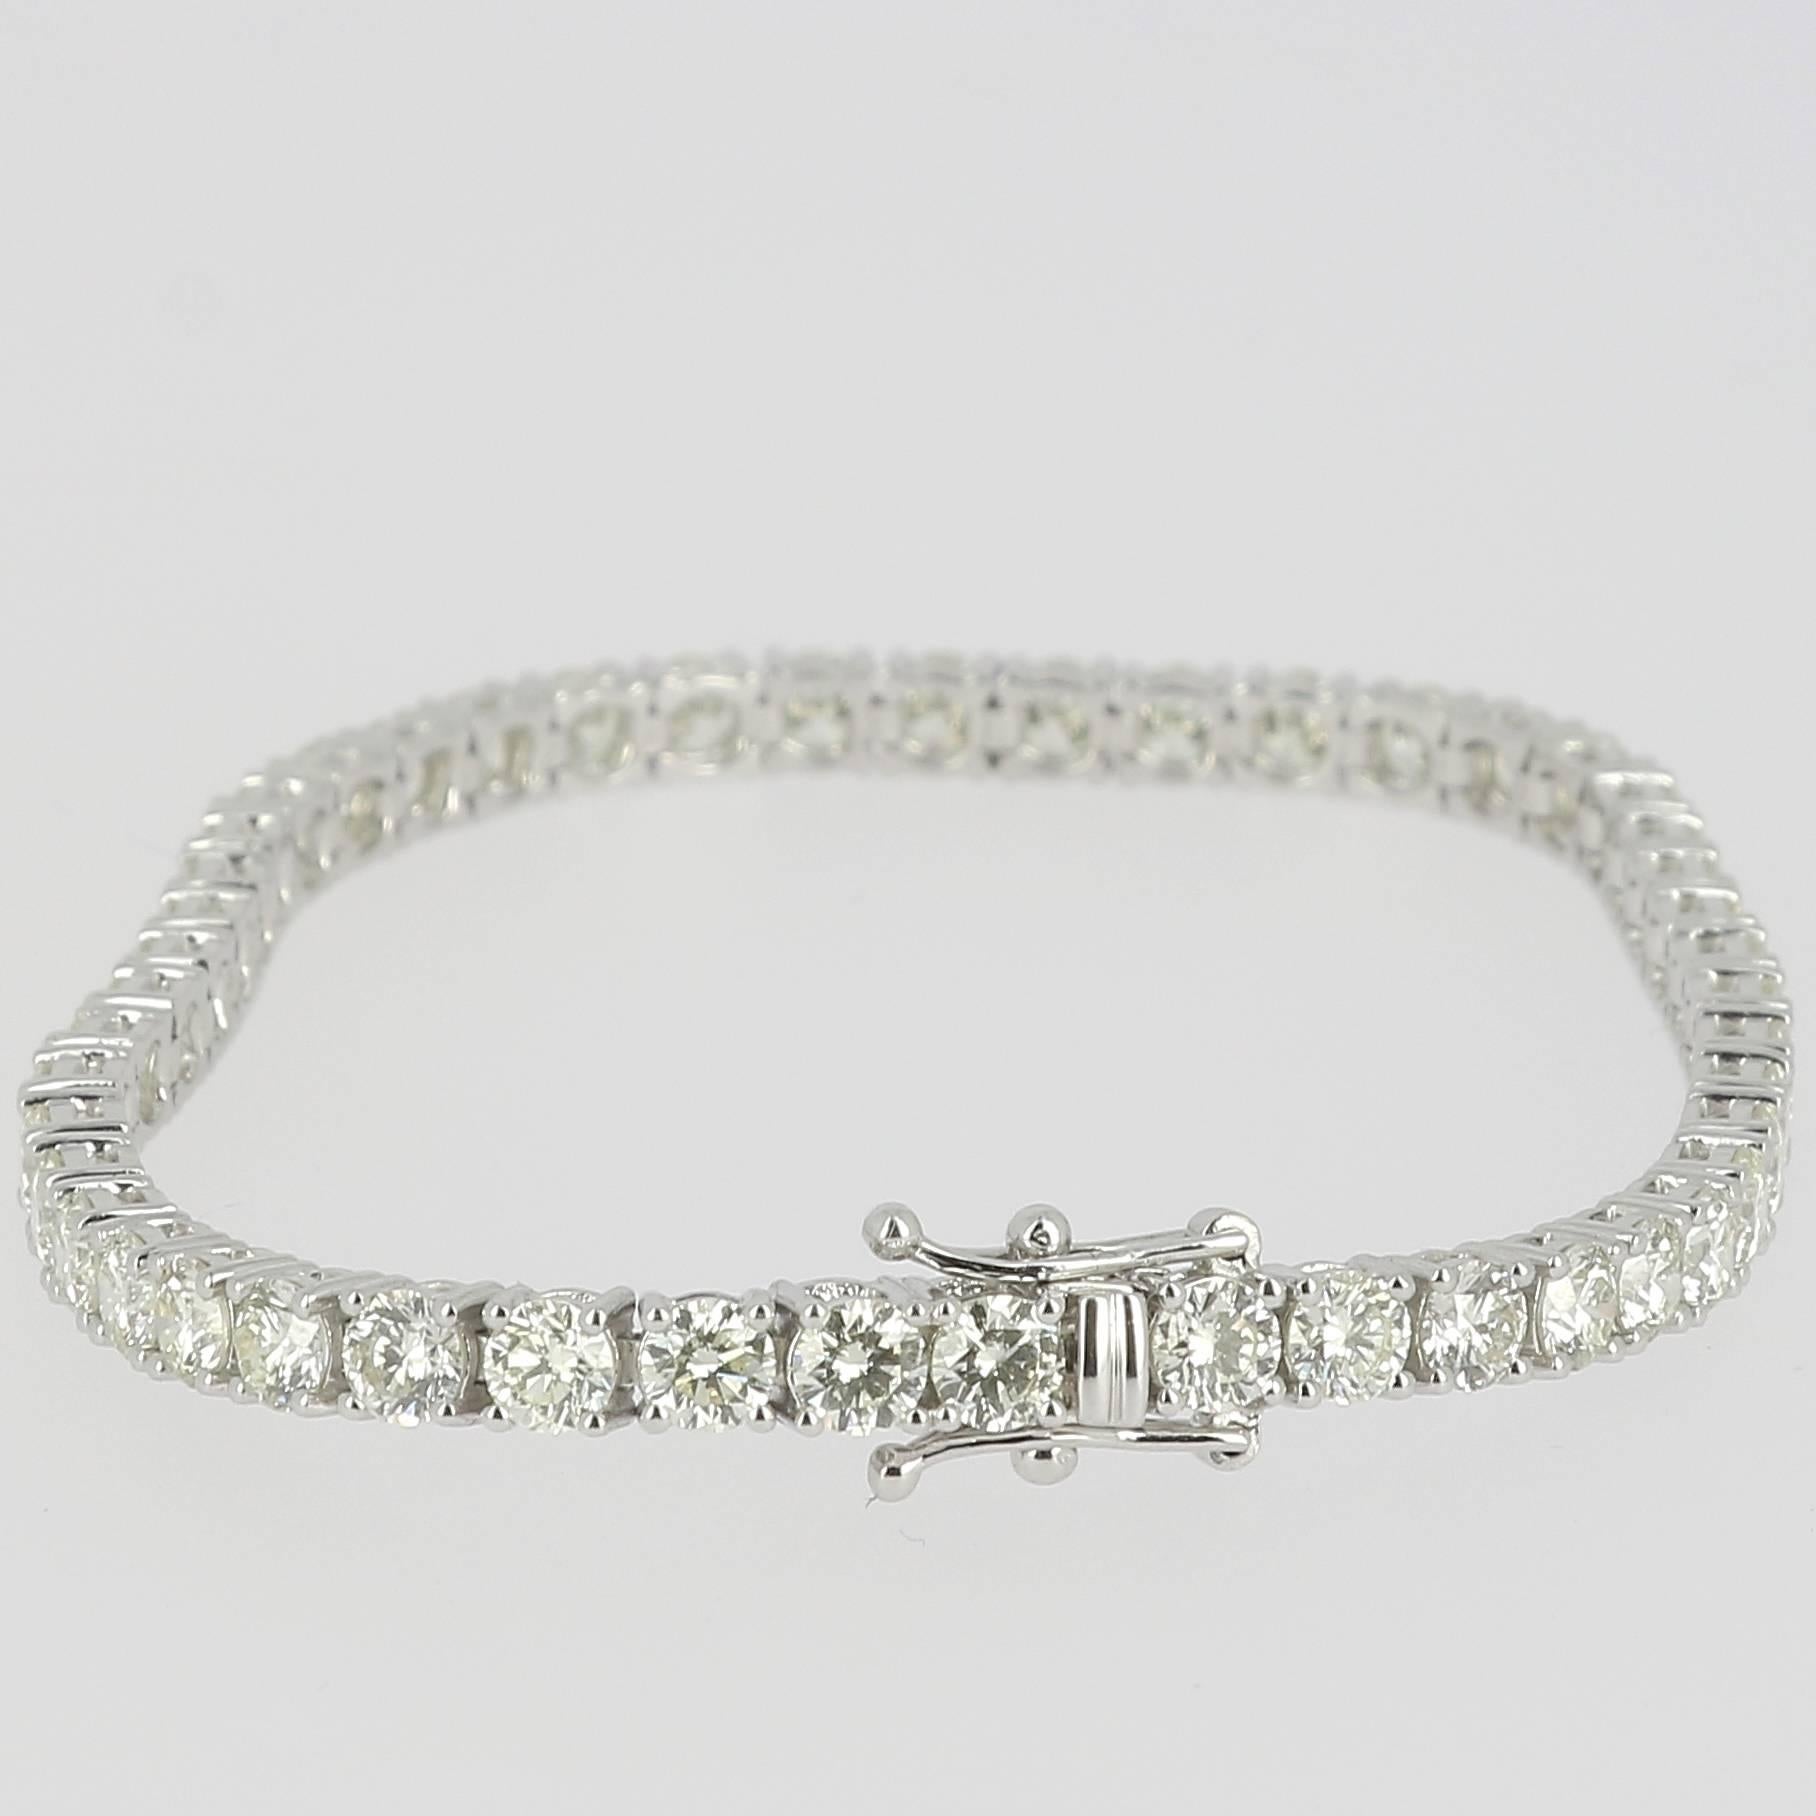 Beautiful And Classic Tennis Bracelet.
The Line Bracelet is 18K White Gold.
There are 8.18 Carats in Diamonds.
There are 48 stones, each Diamonds weight 0.17 Carats.
The Tennis Bracelet is inches 7,5 long (19 cm).
The Bracelet weight 12.68